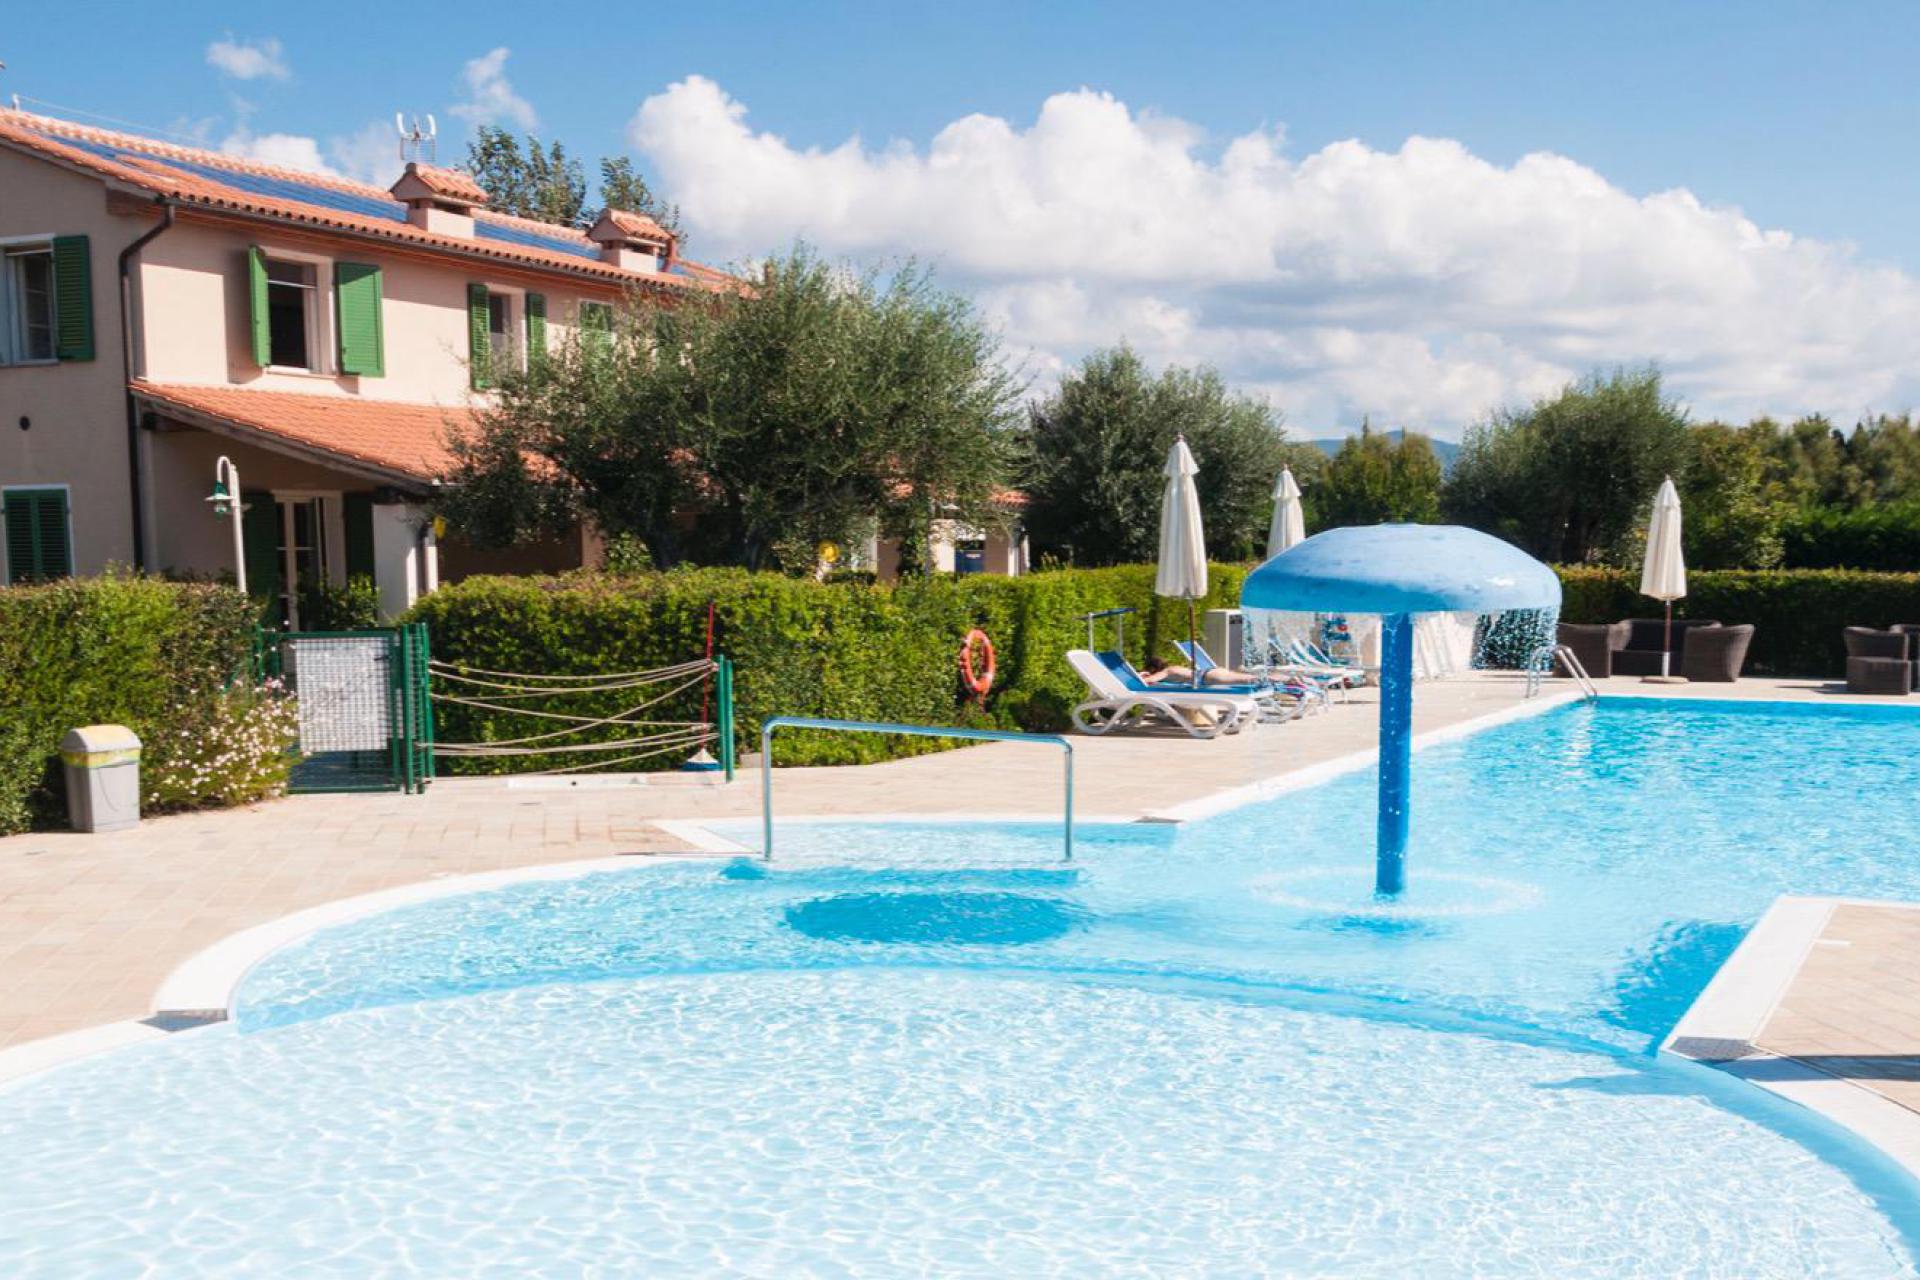 Cosy agriturismo 800 meters from the Tuscan coast